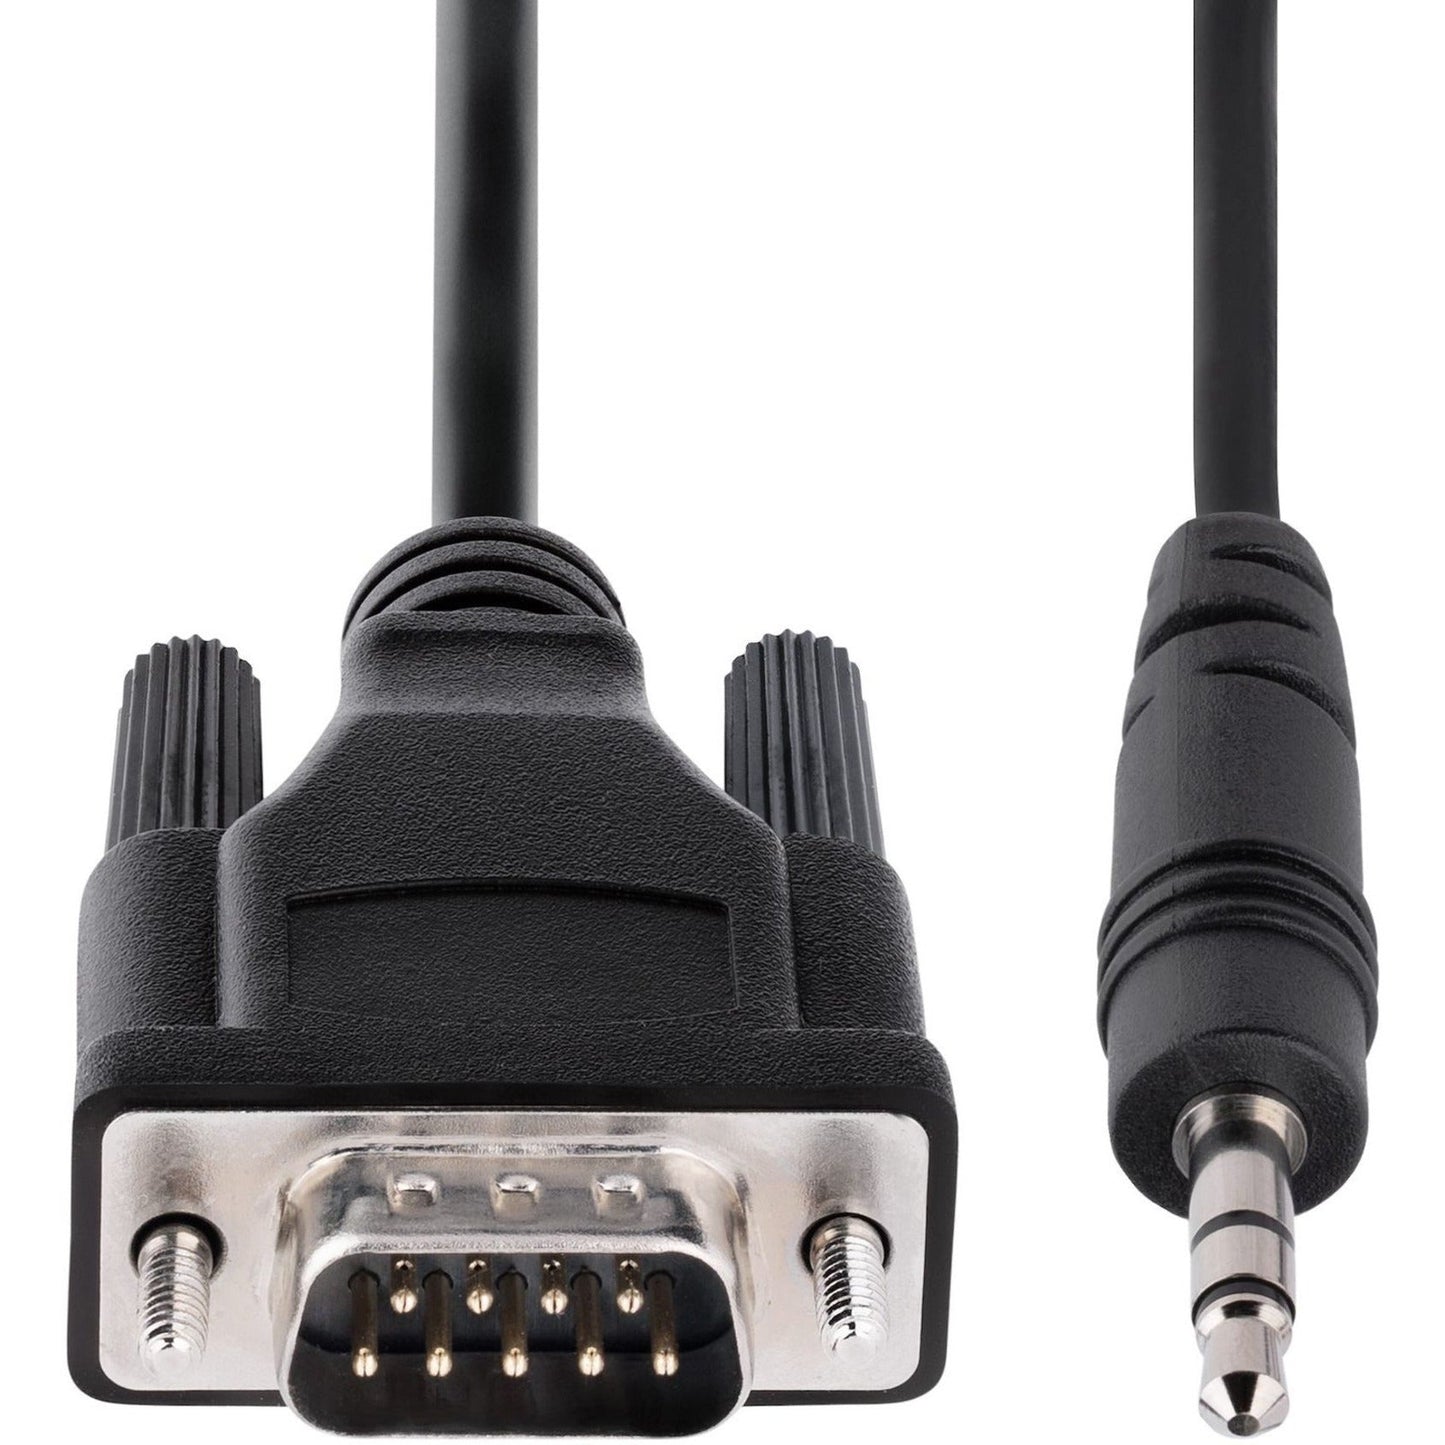 StarTech.com 3ft (1m) DB9 to 3.5mm Serial Cable for Serial Device Configuration RS232 DB9 Male to 3.5mm for Calibrating via Audio Jack